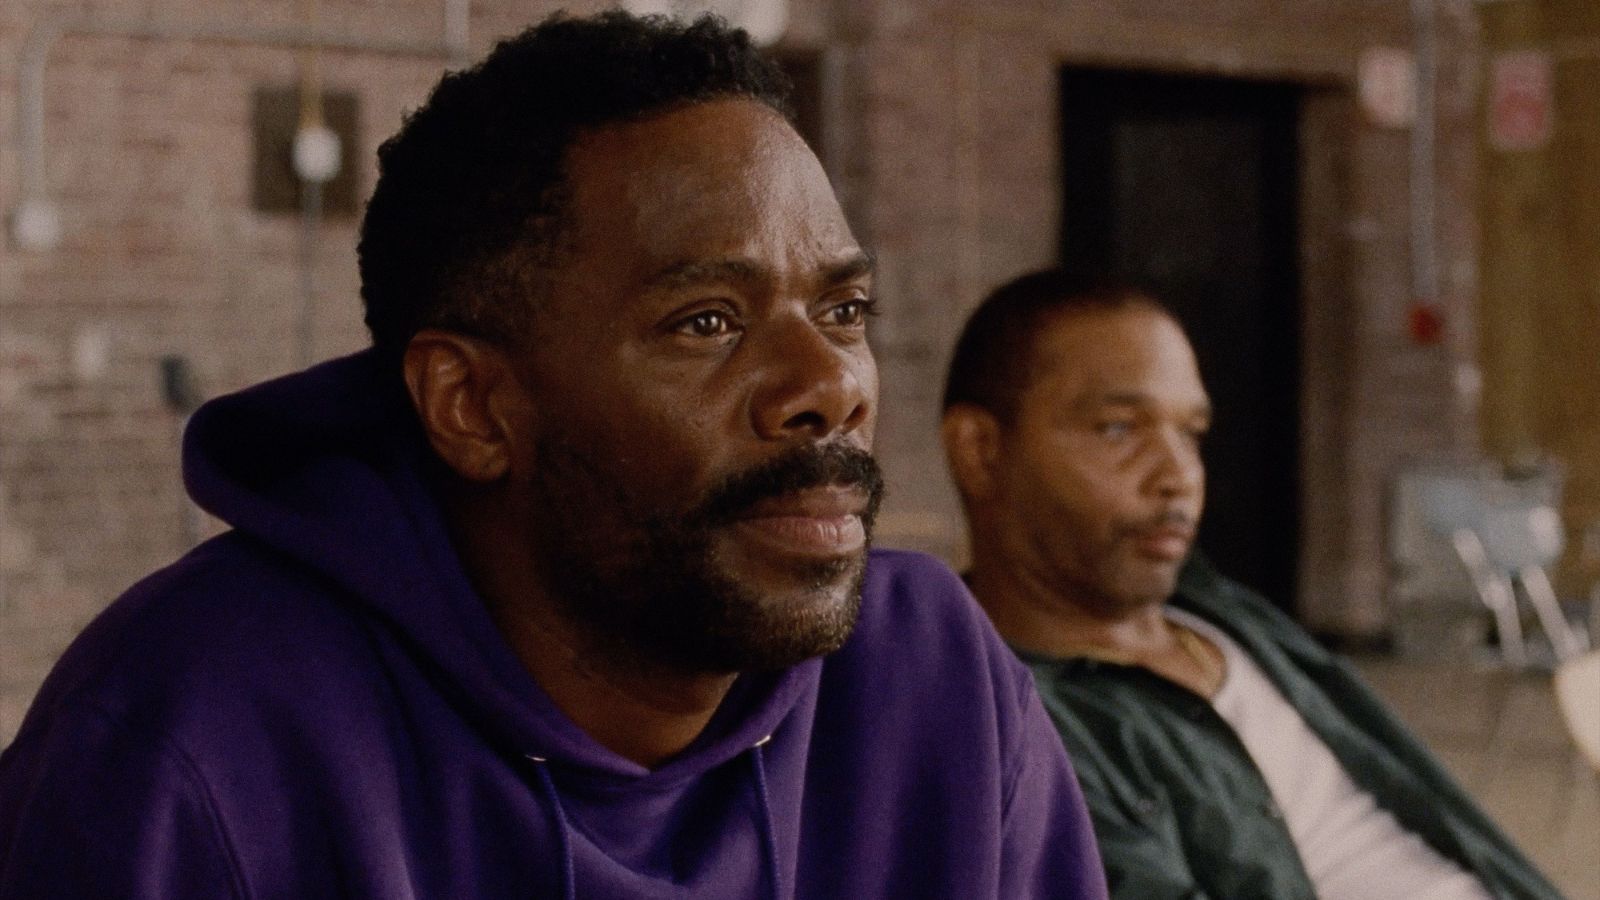 Still from Sing Sing, showing a close up of Colman Domingo, who wears a purple hoodie. Beside him another man sits wearing a white t-shirt and green overshirt. They are in a room with brick walls. Courtesy of EIFF